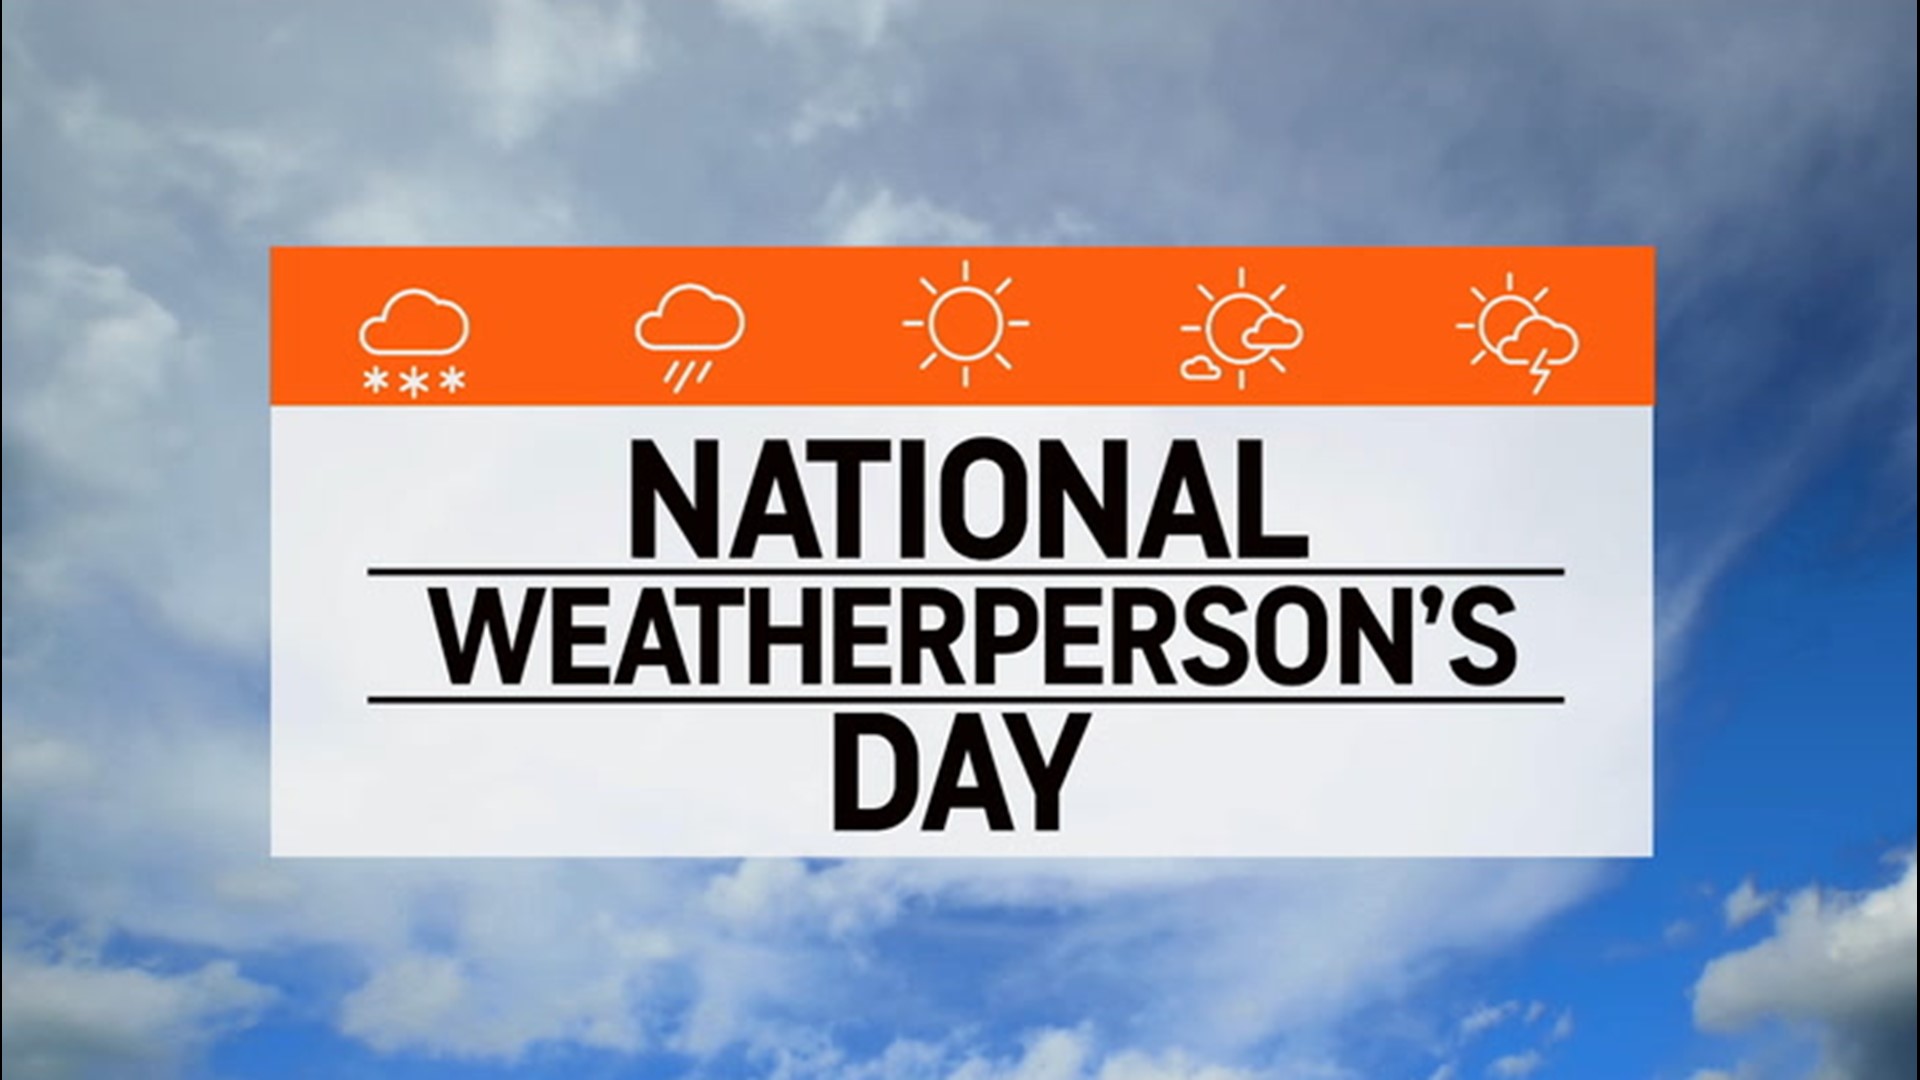 On National Weatherperson's Day, AccuWeather meteorologists share how they got into the field of meteorology and their favorite aspects of the profession.